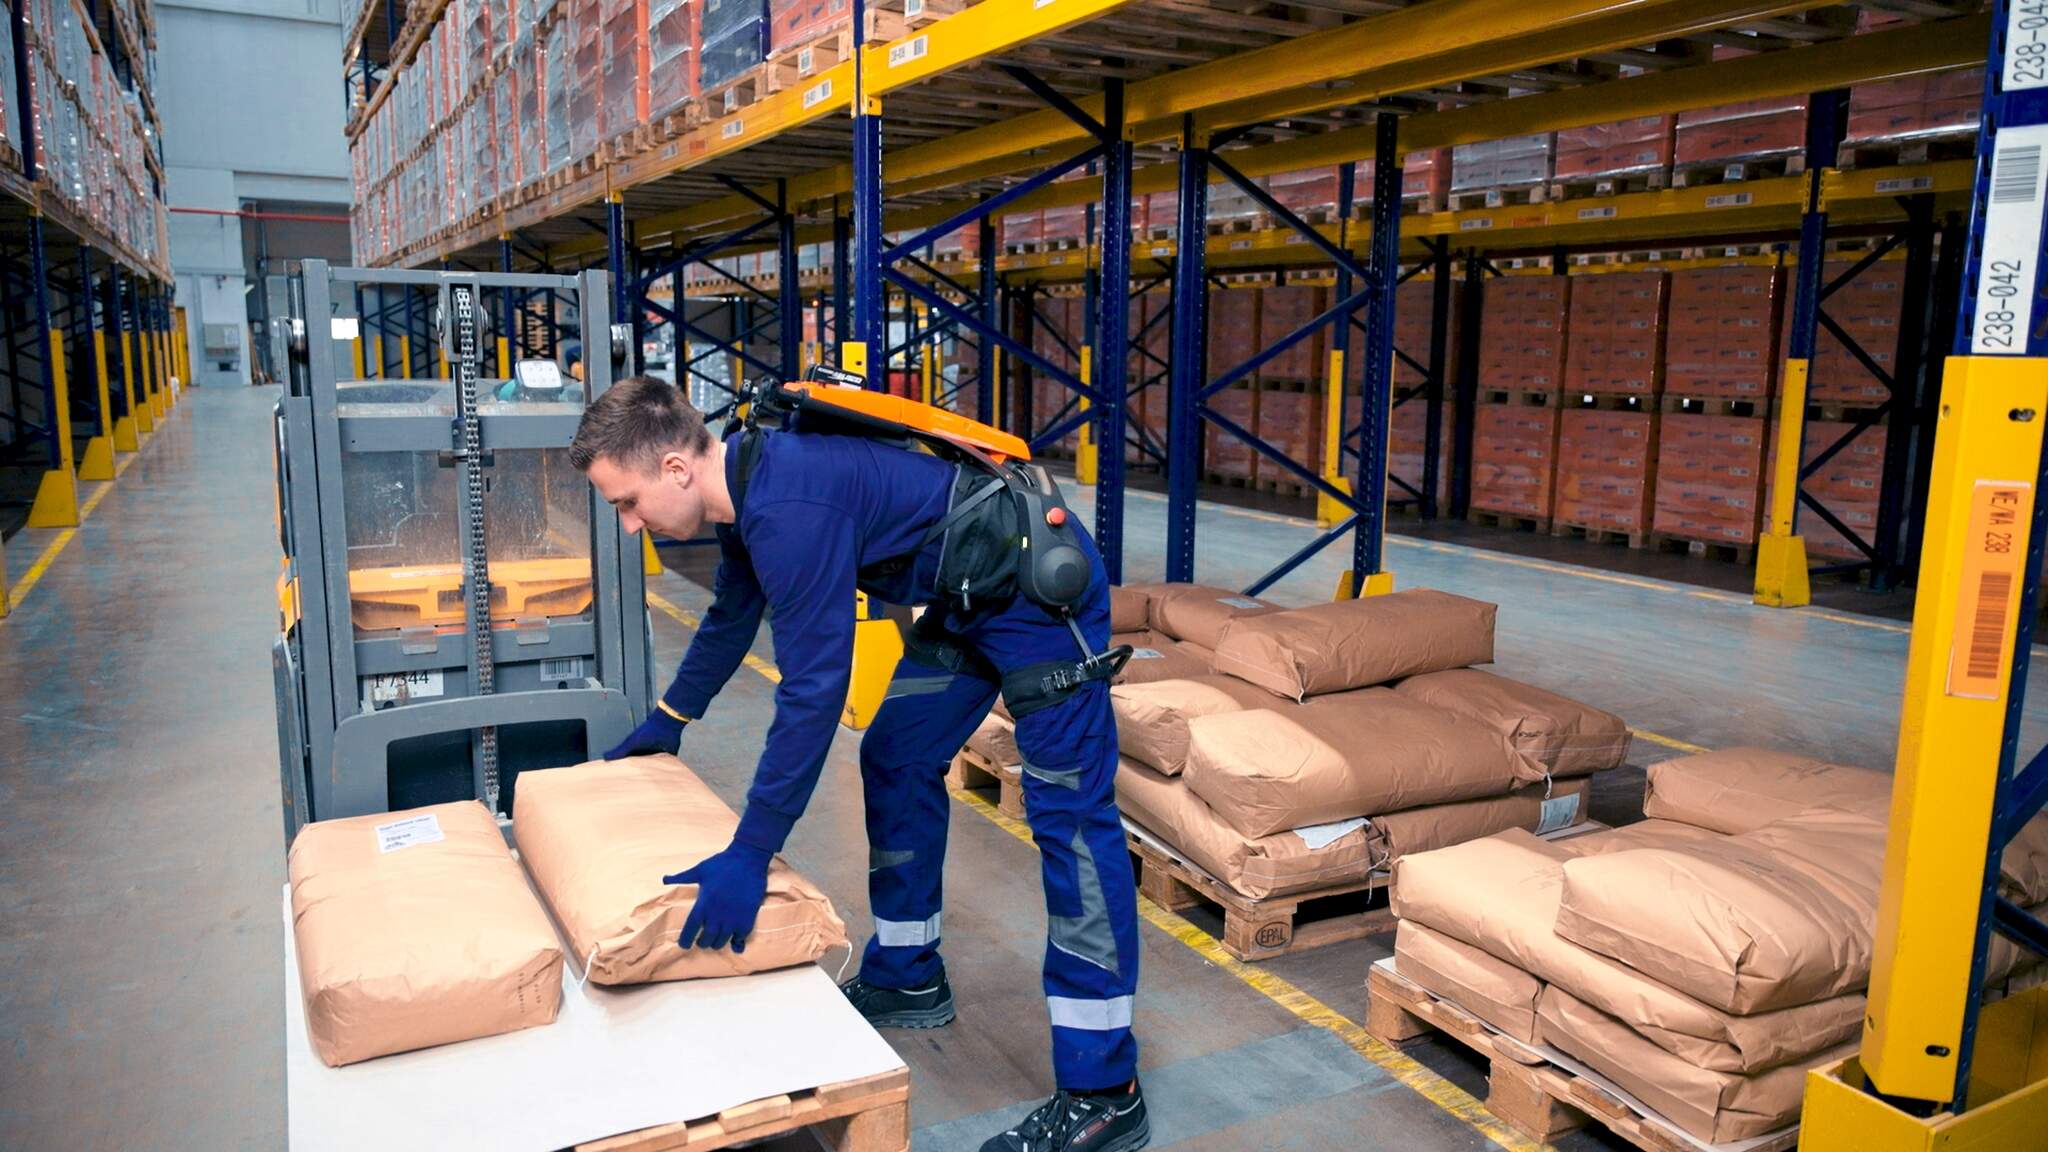 Active exoskeletons provide relief in the warehouse